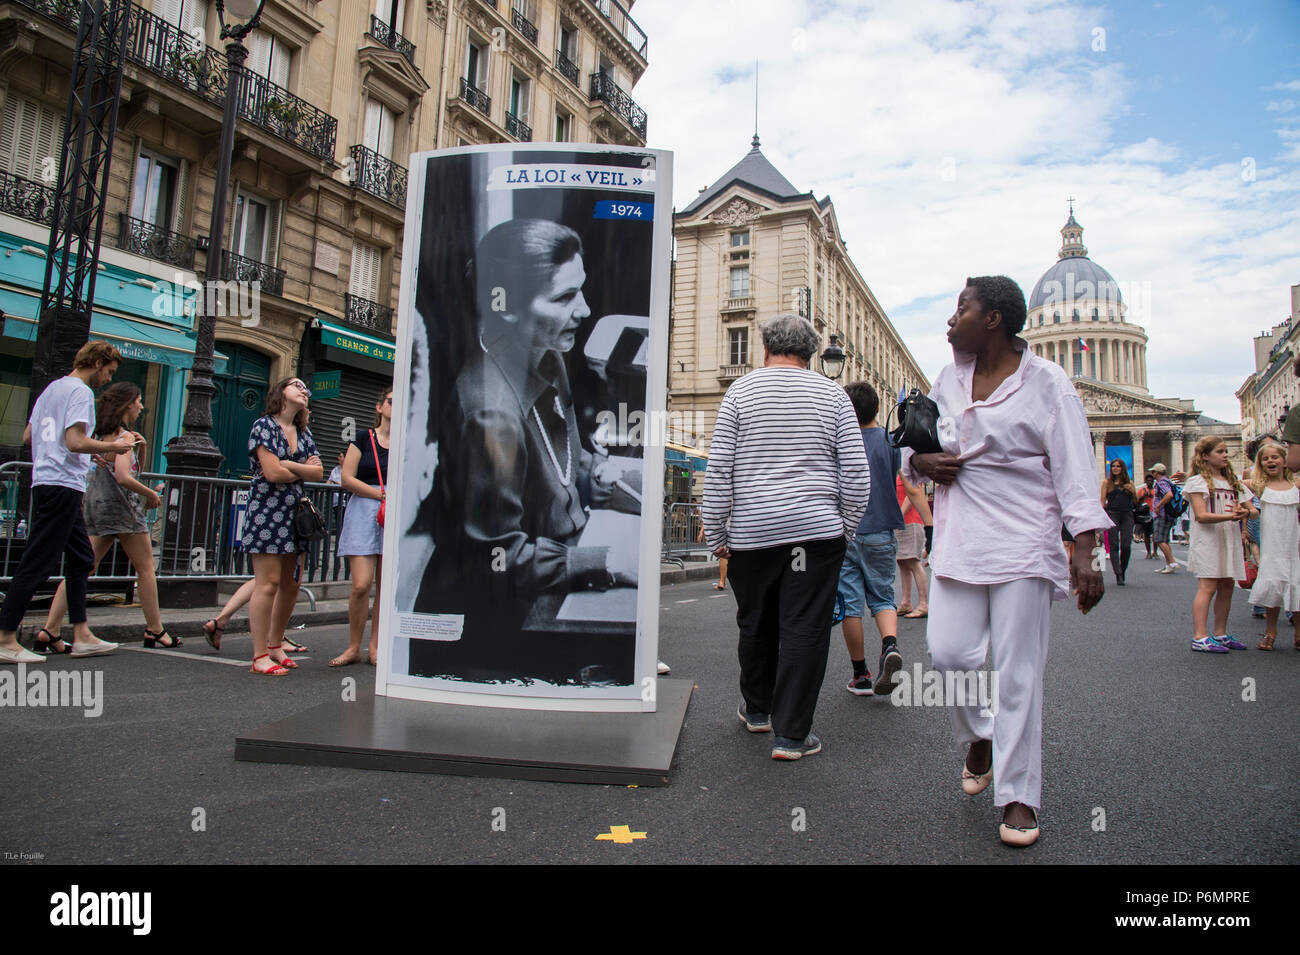 Portrait of the deceased is seen displayed in the street. The burial ceremony of former French politician and Holocaust survivor Simone Veil and her husband Antoine Veil at the Pantheon in Paris. Former Health Minister, Simone Veil, who passed away on June 30, 2017 became president of the European Parliament and one of France's most revered politicians by advocating the 1975 law legalizing abortion in France. Stock Photo